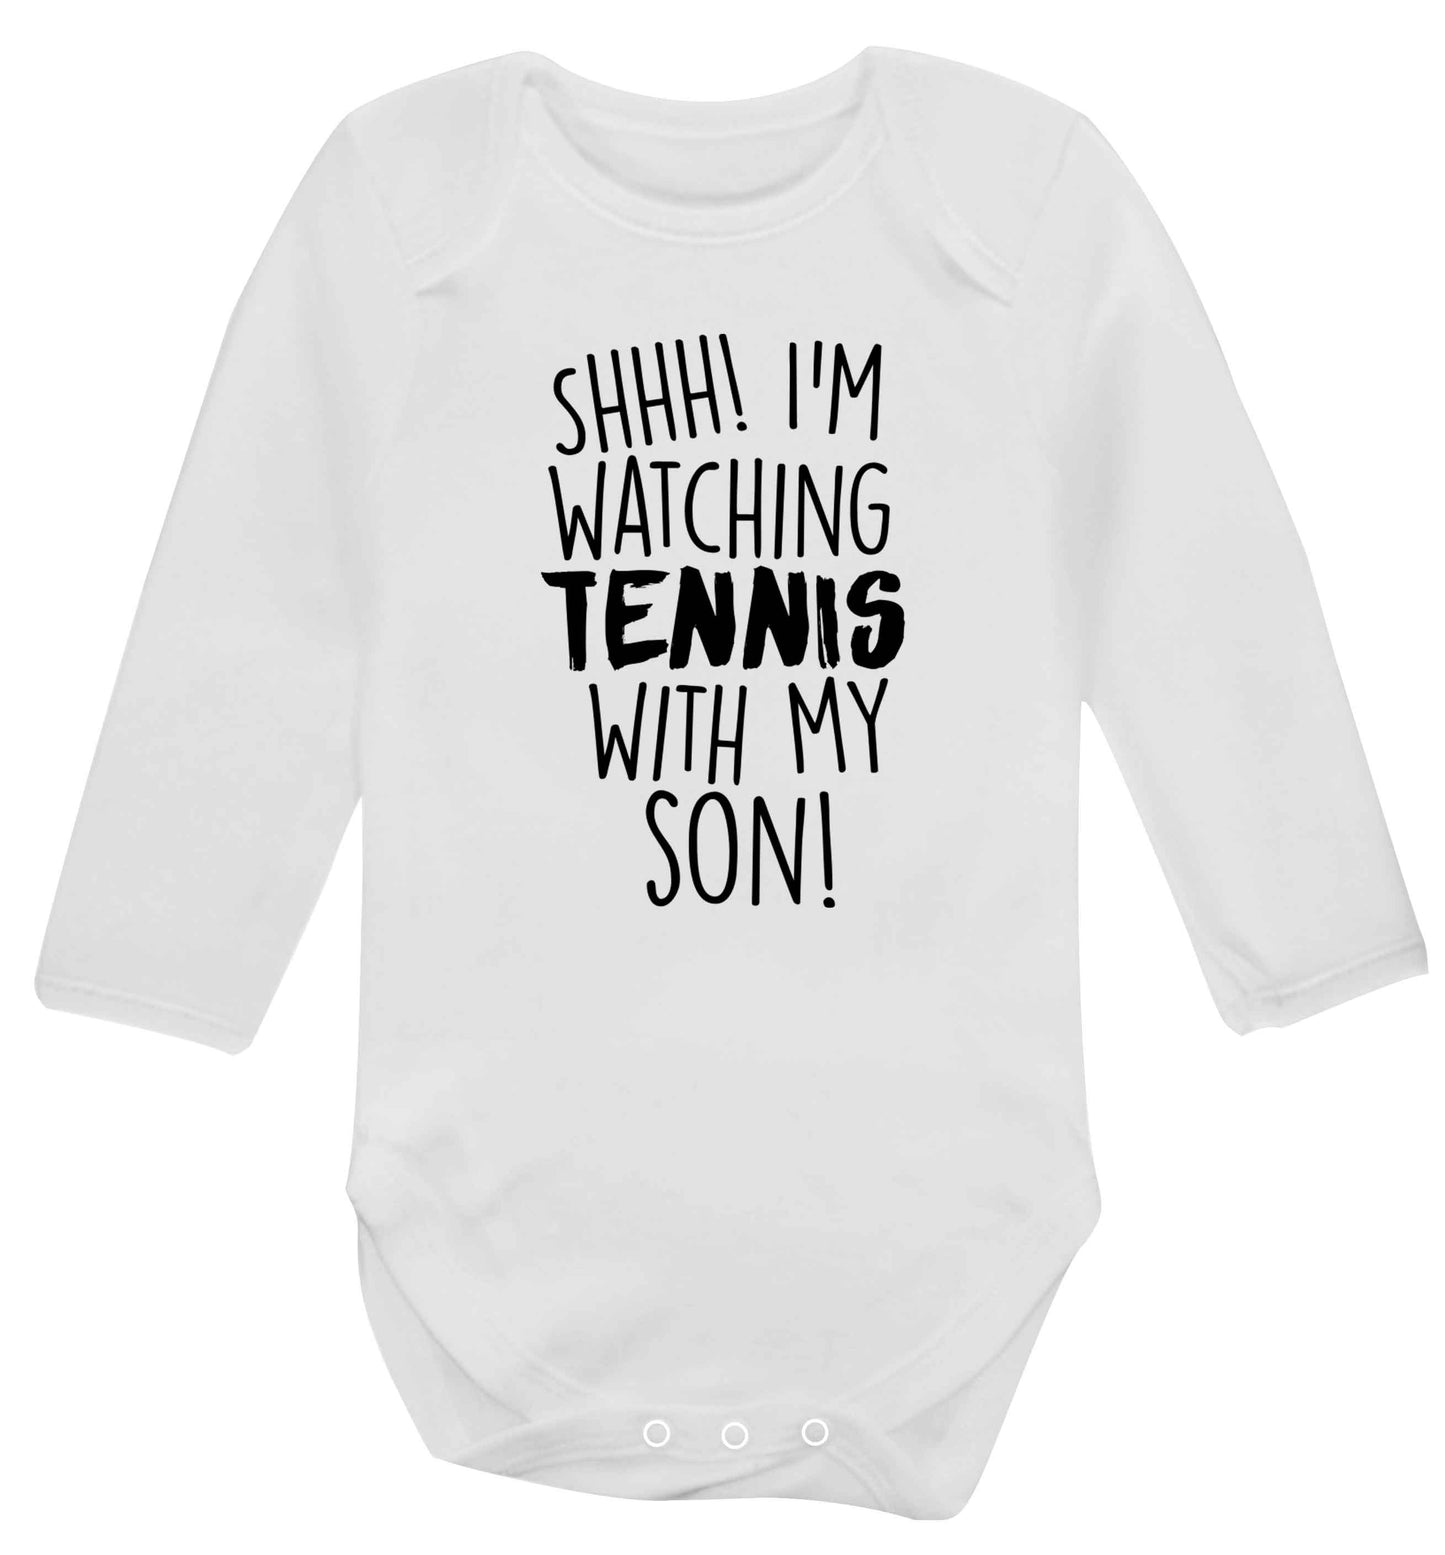 Shh! I'm watching tennis with my son! Baby Vest long sleeved white 6-12 months